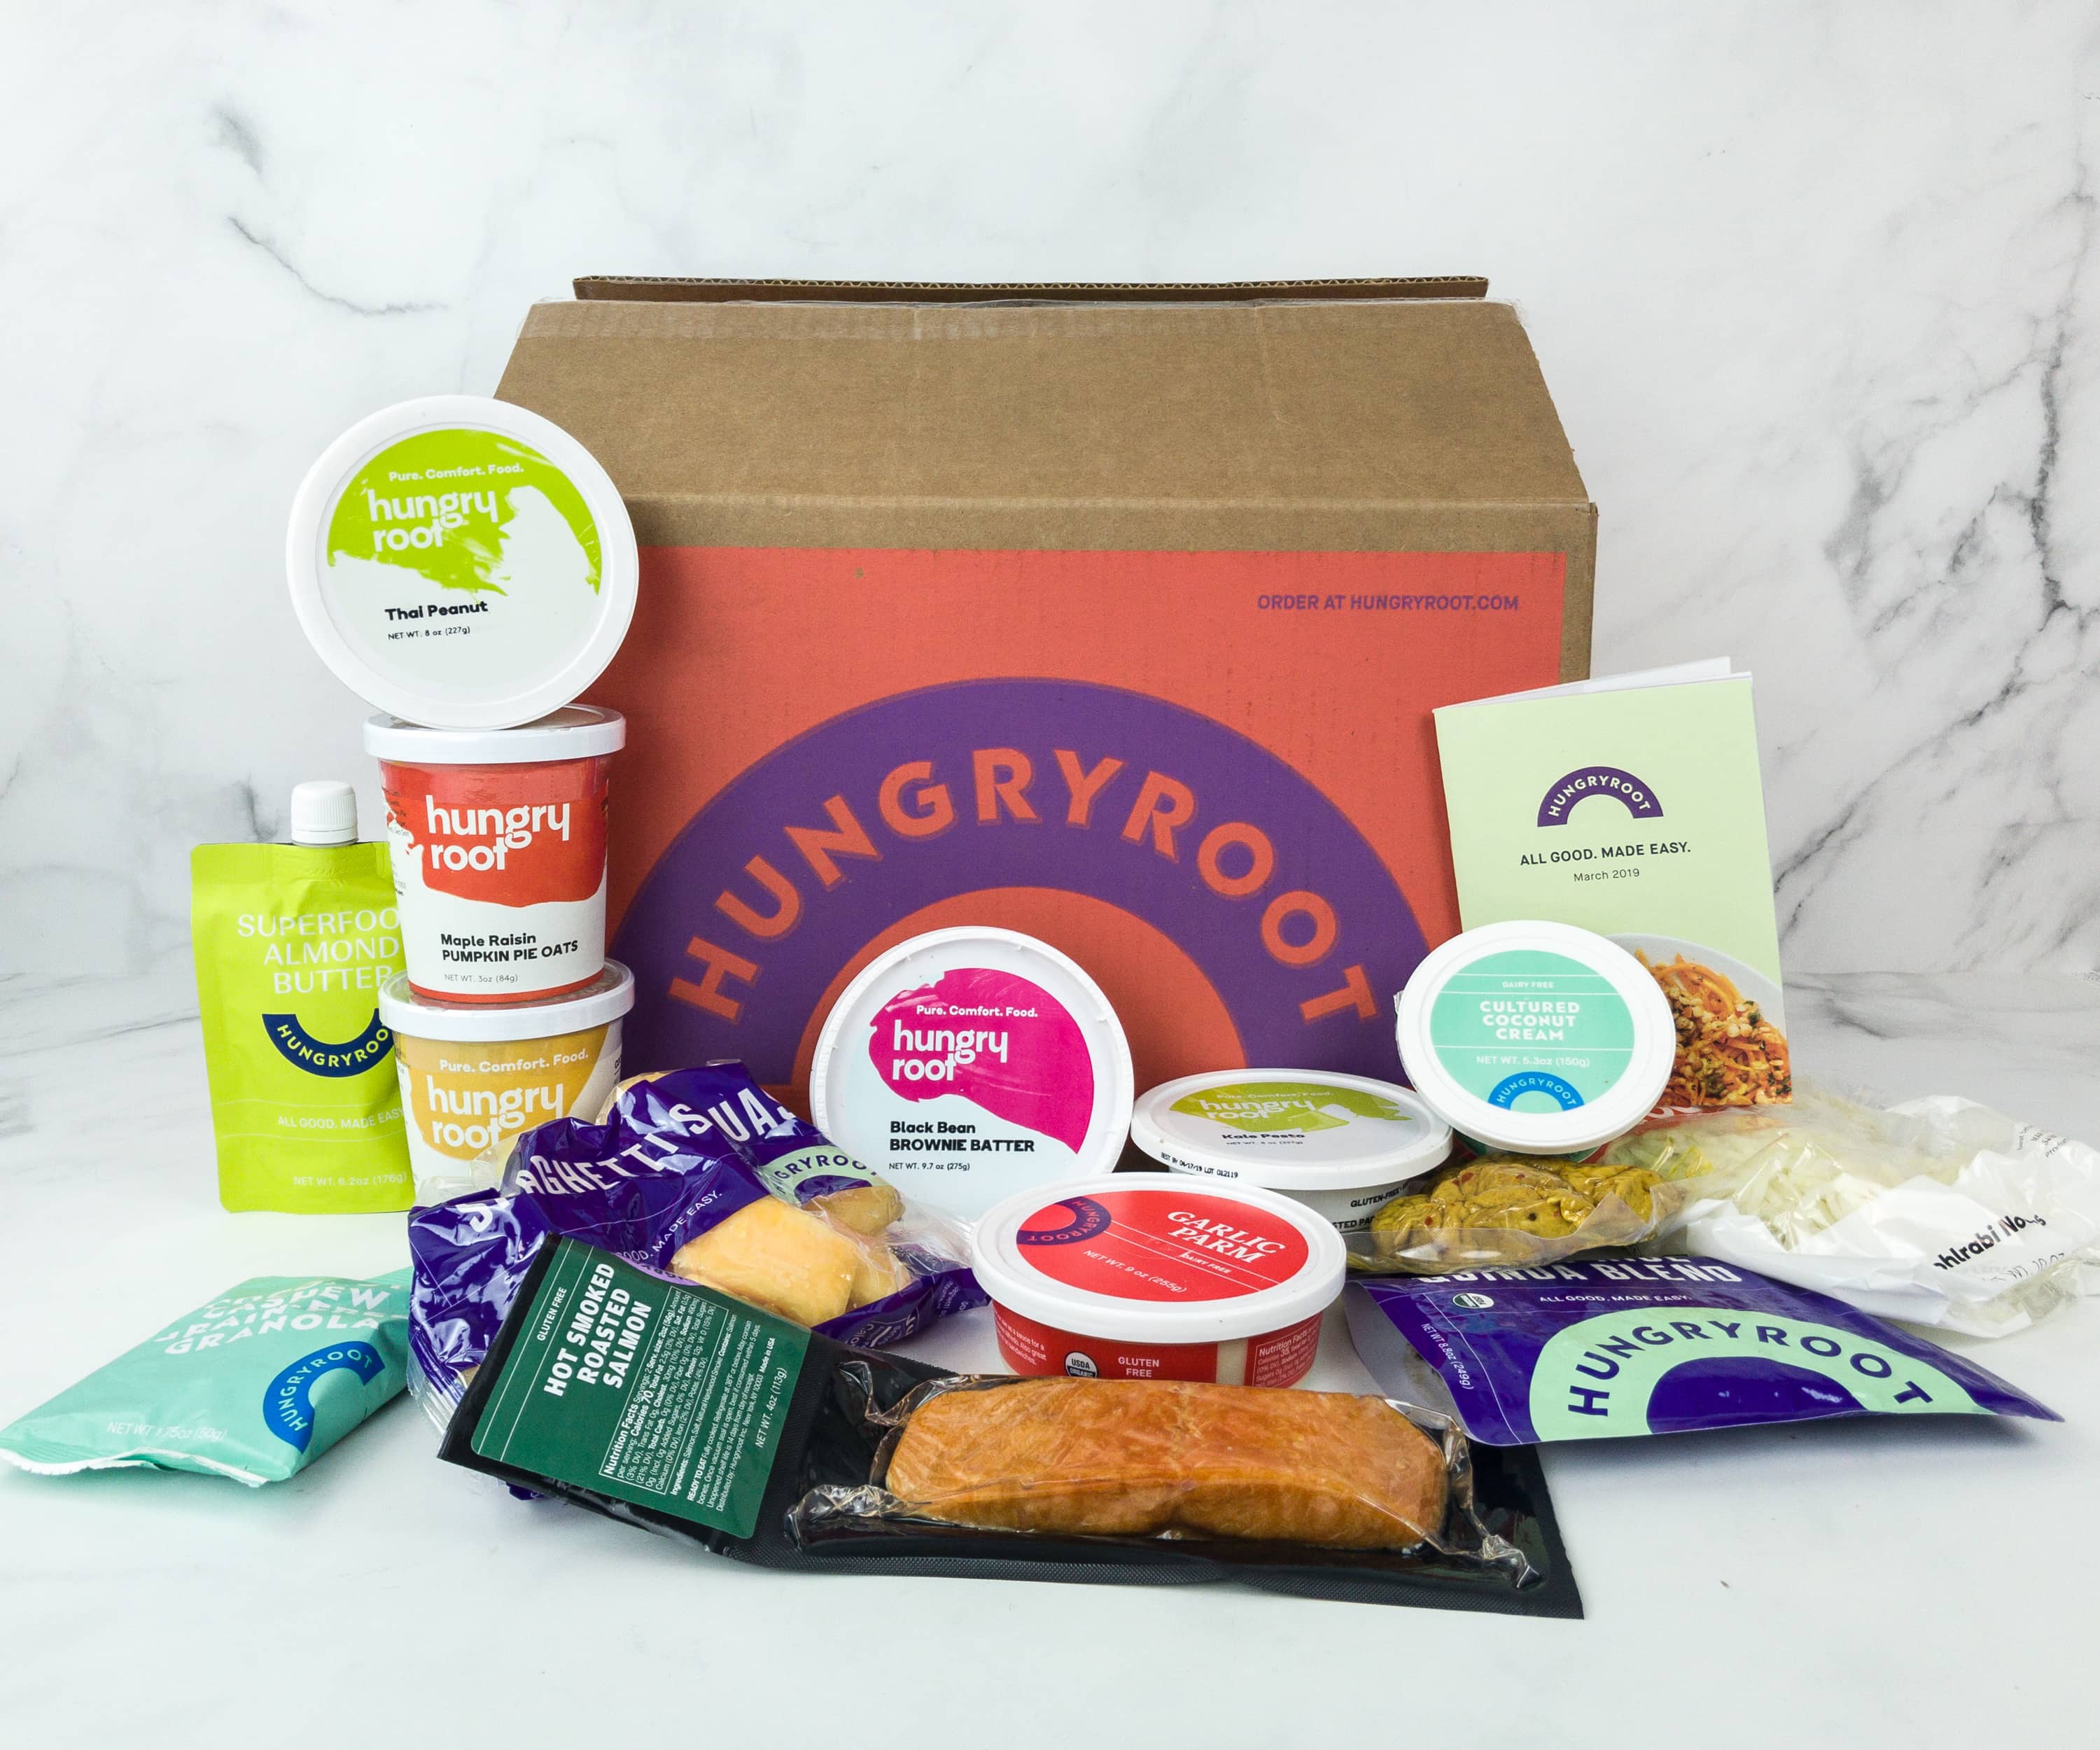 Hungryroot Review: Would We Order It Again?